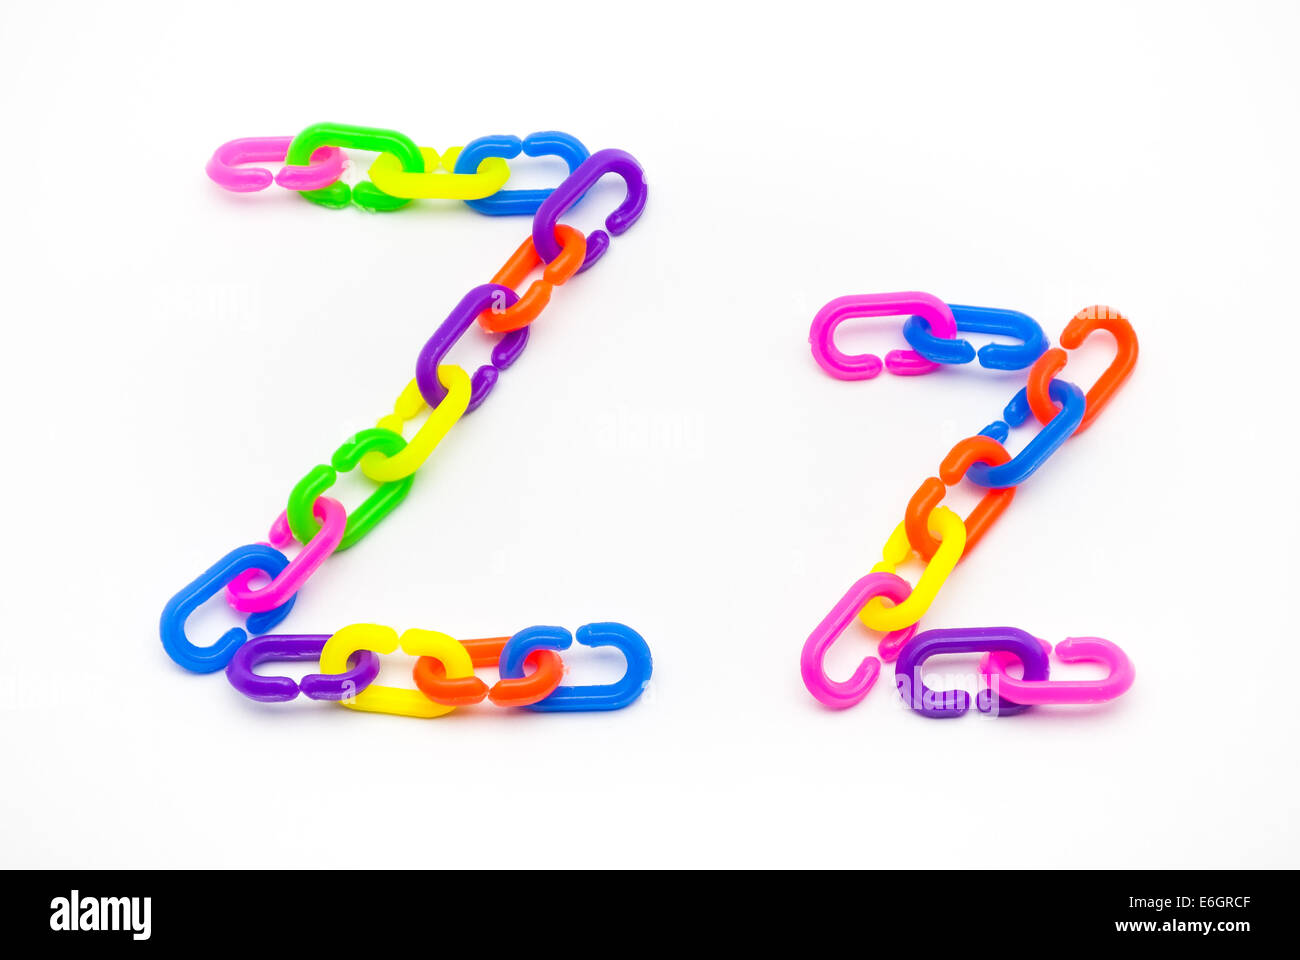 Z and z Alphabet, Created by Colorful Plastic Chain. Stock Photo